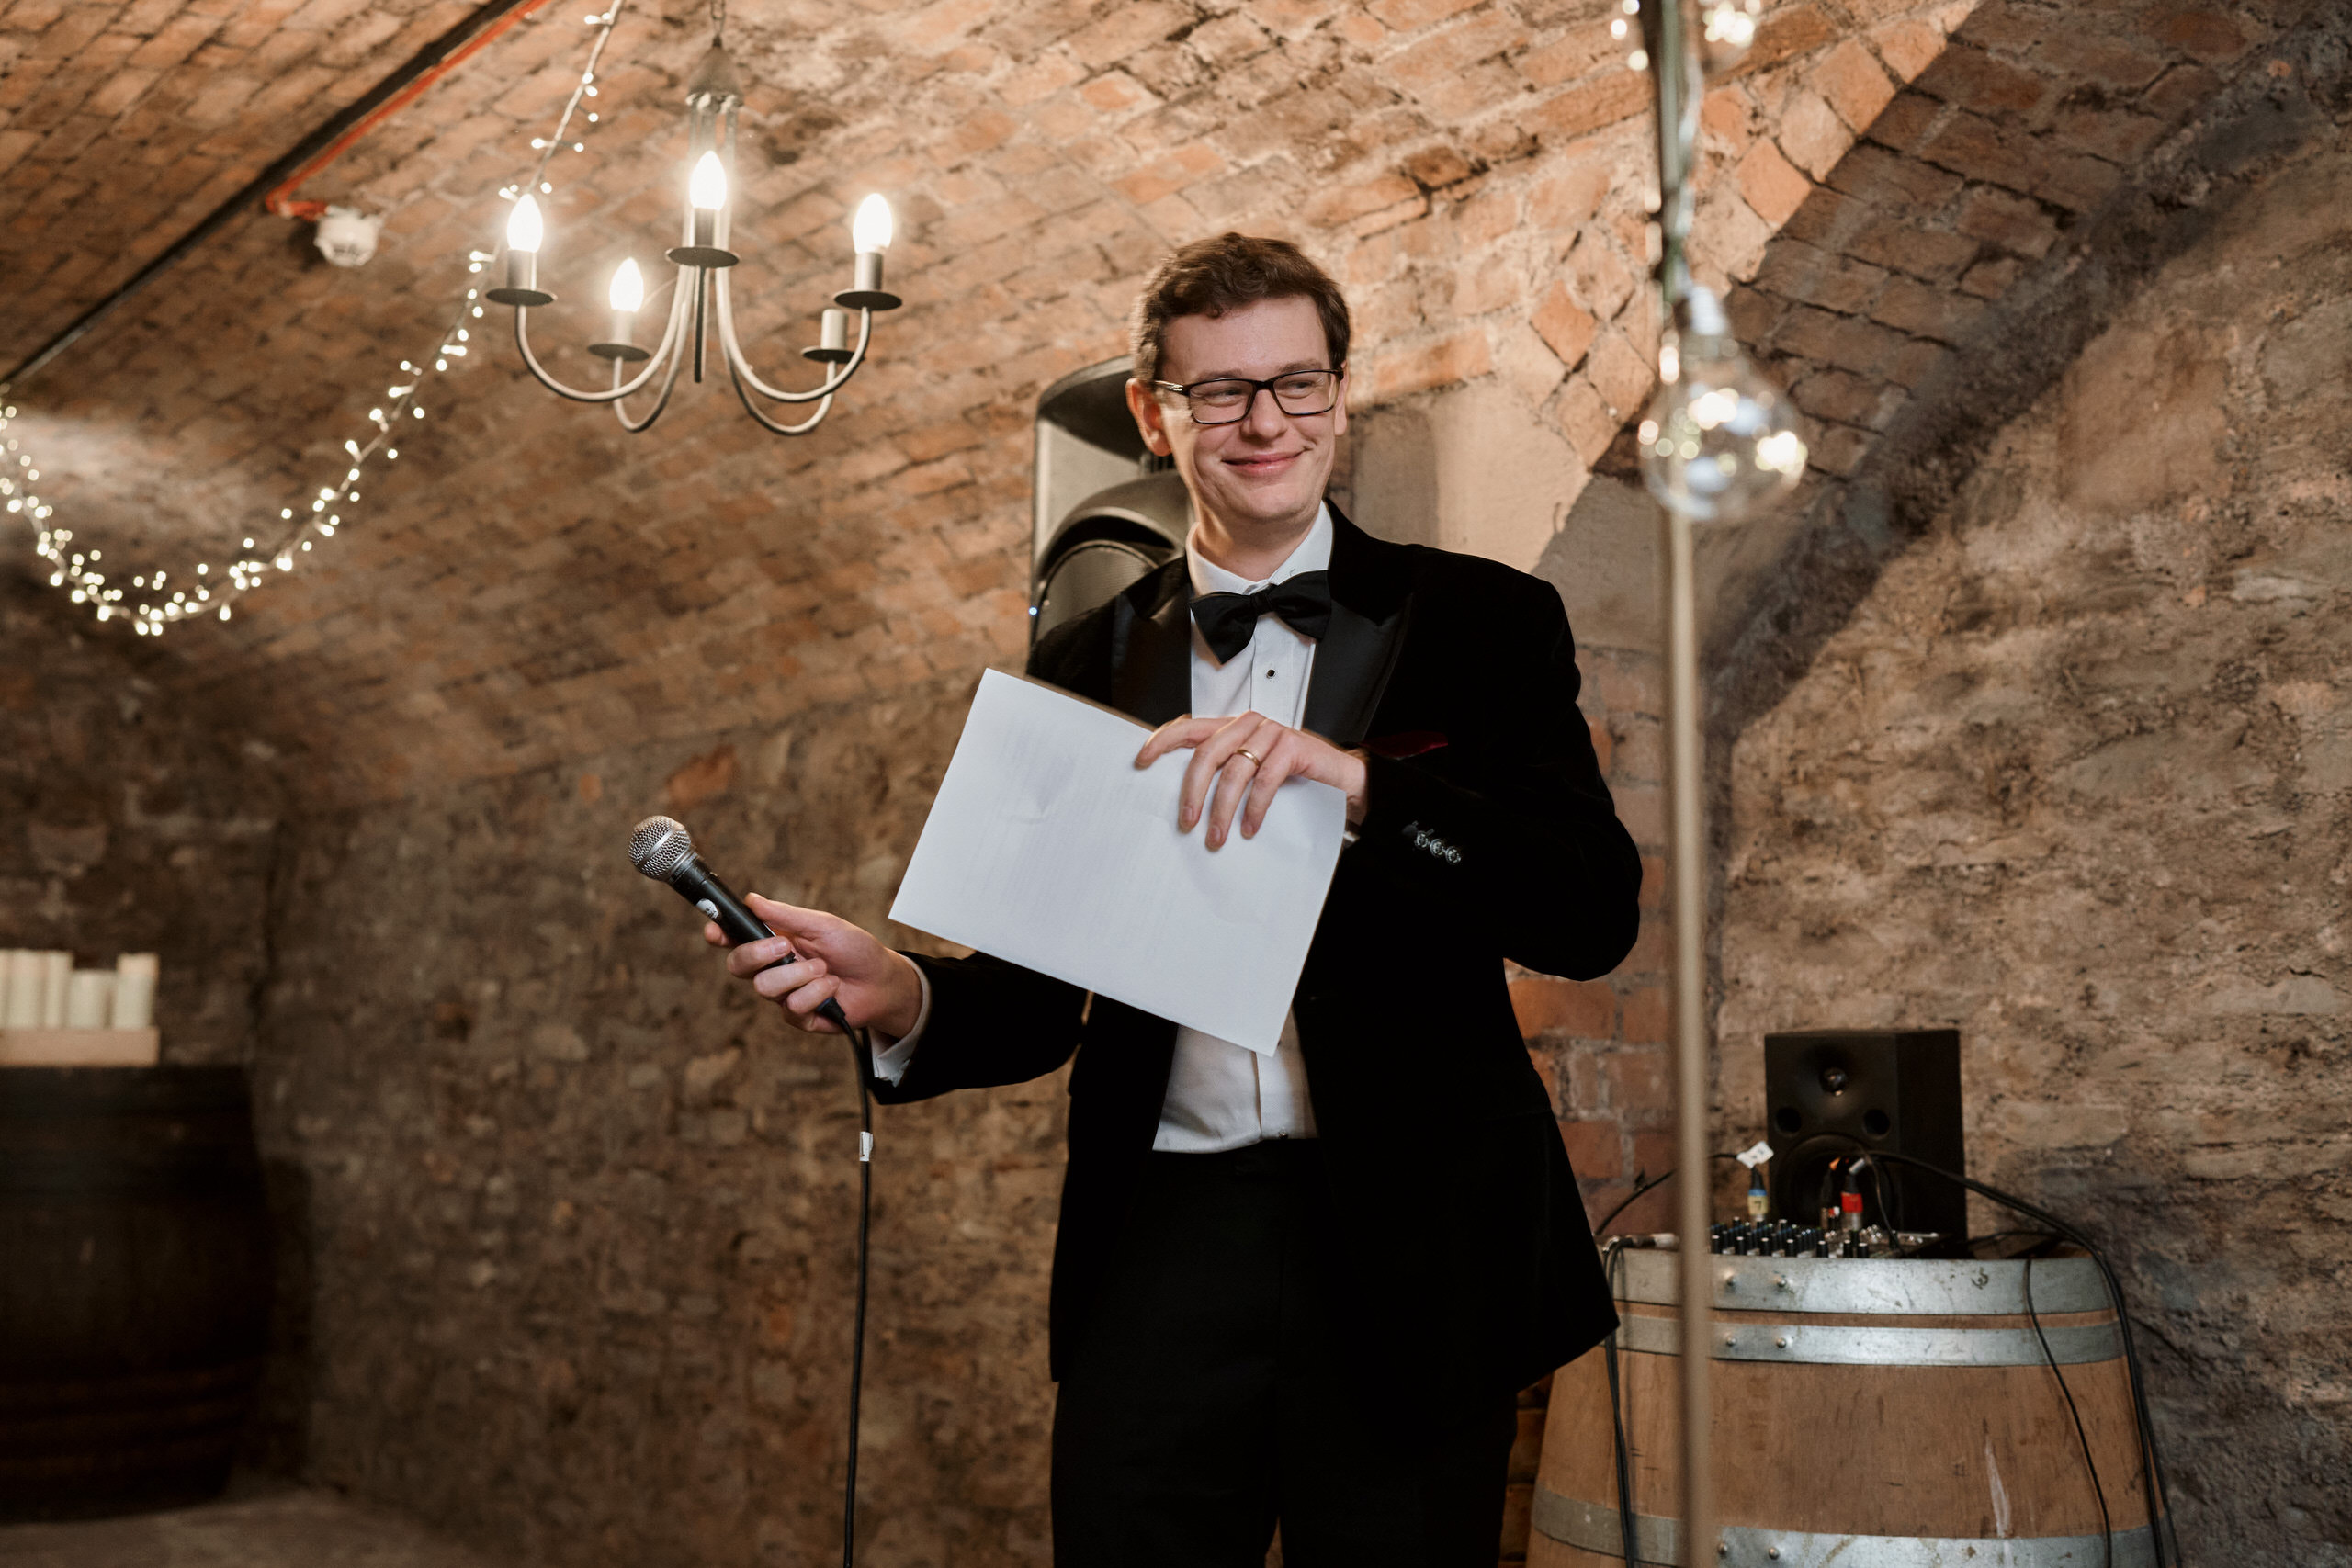 A guy in a suit is holding a mic in a room where they store wine.